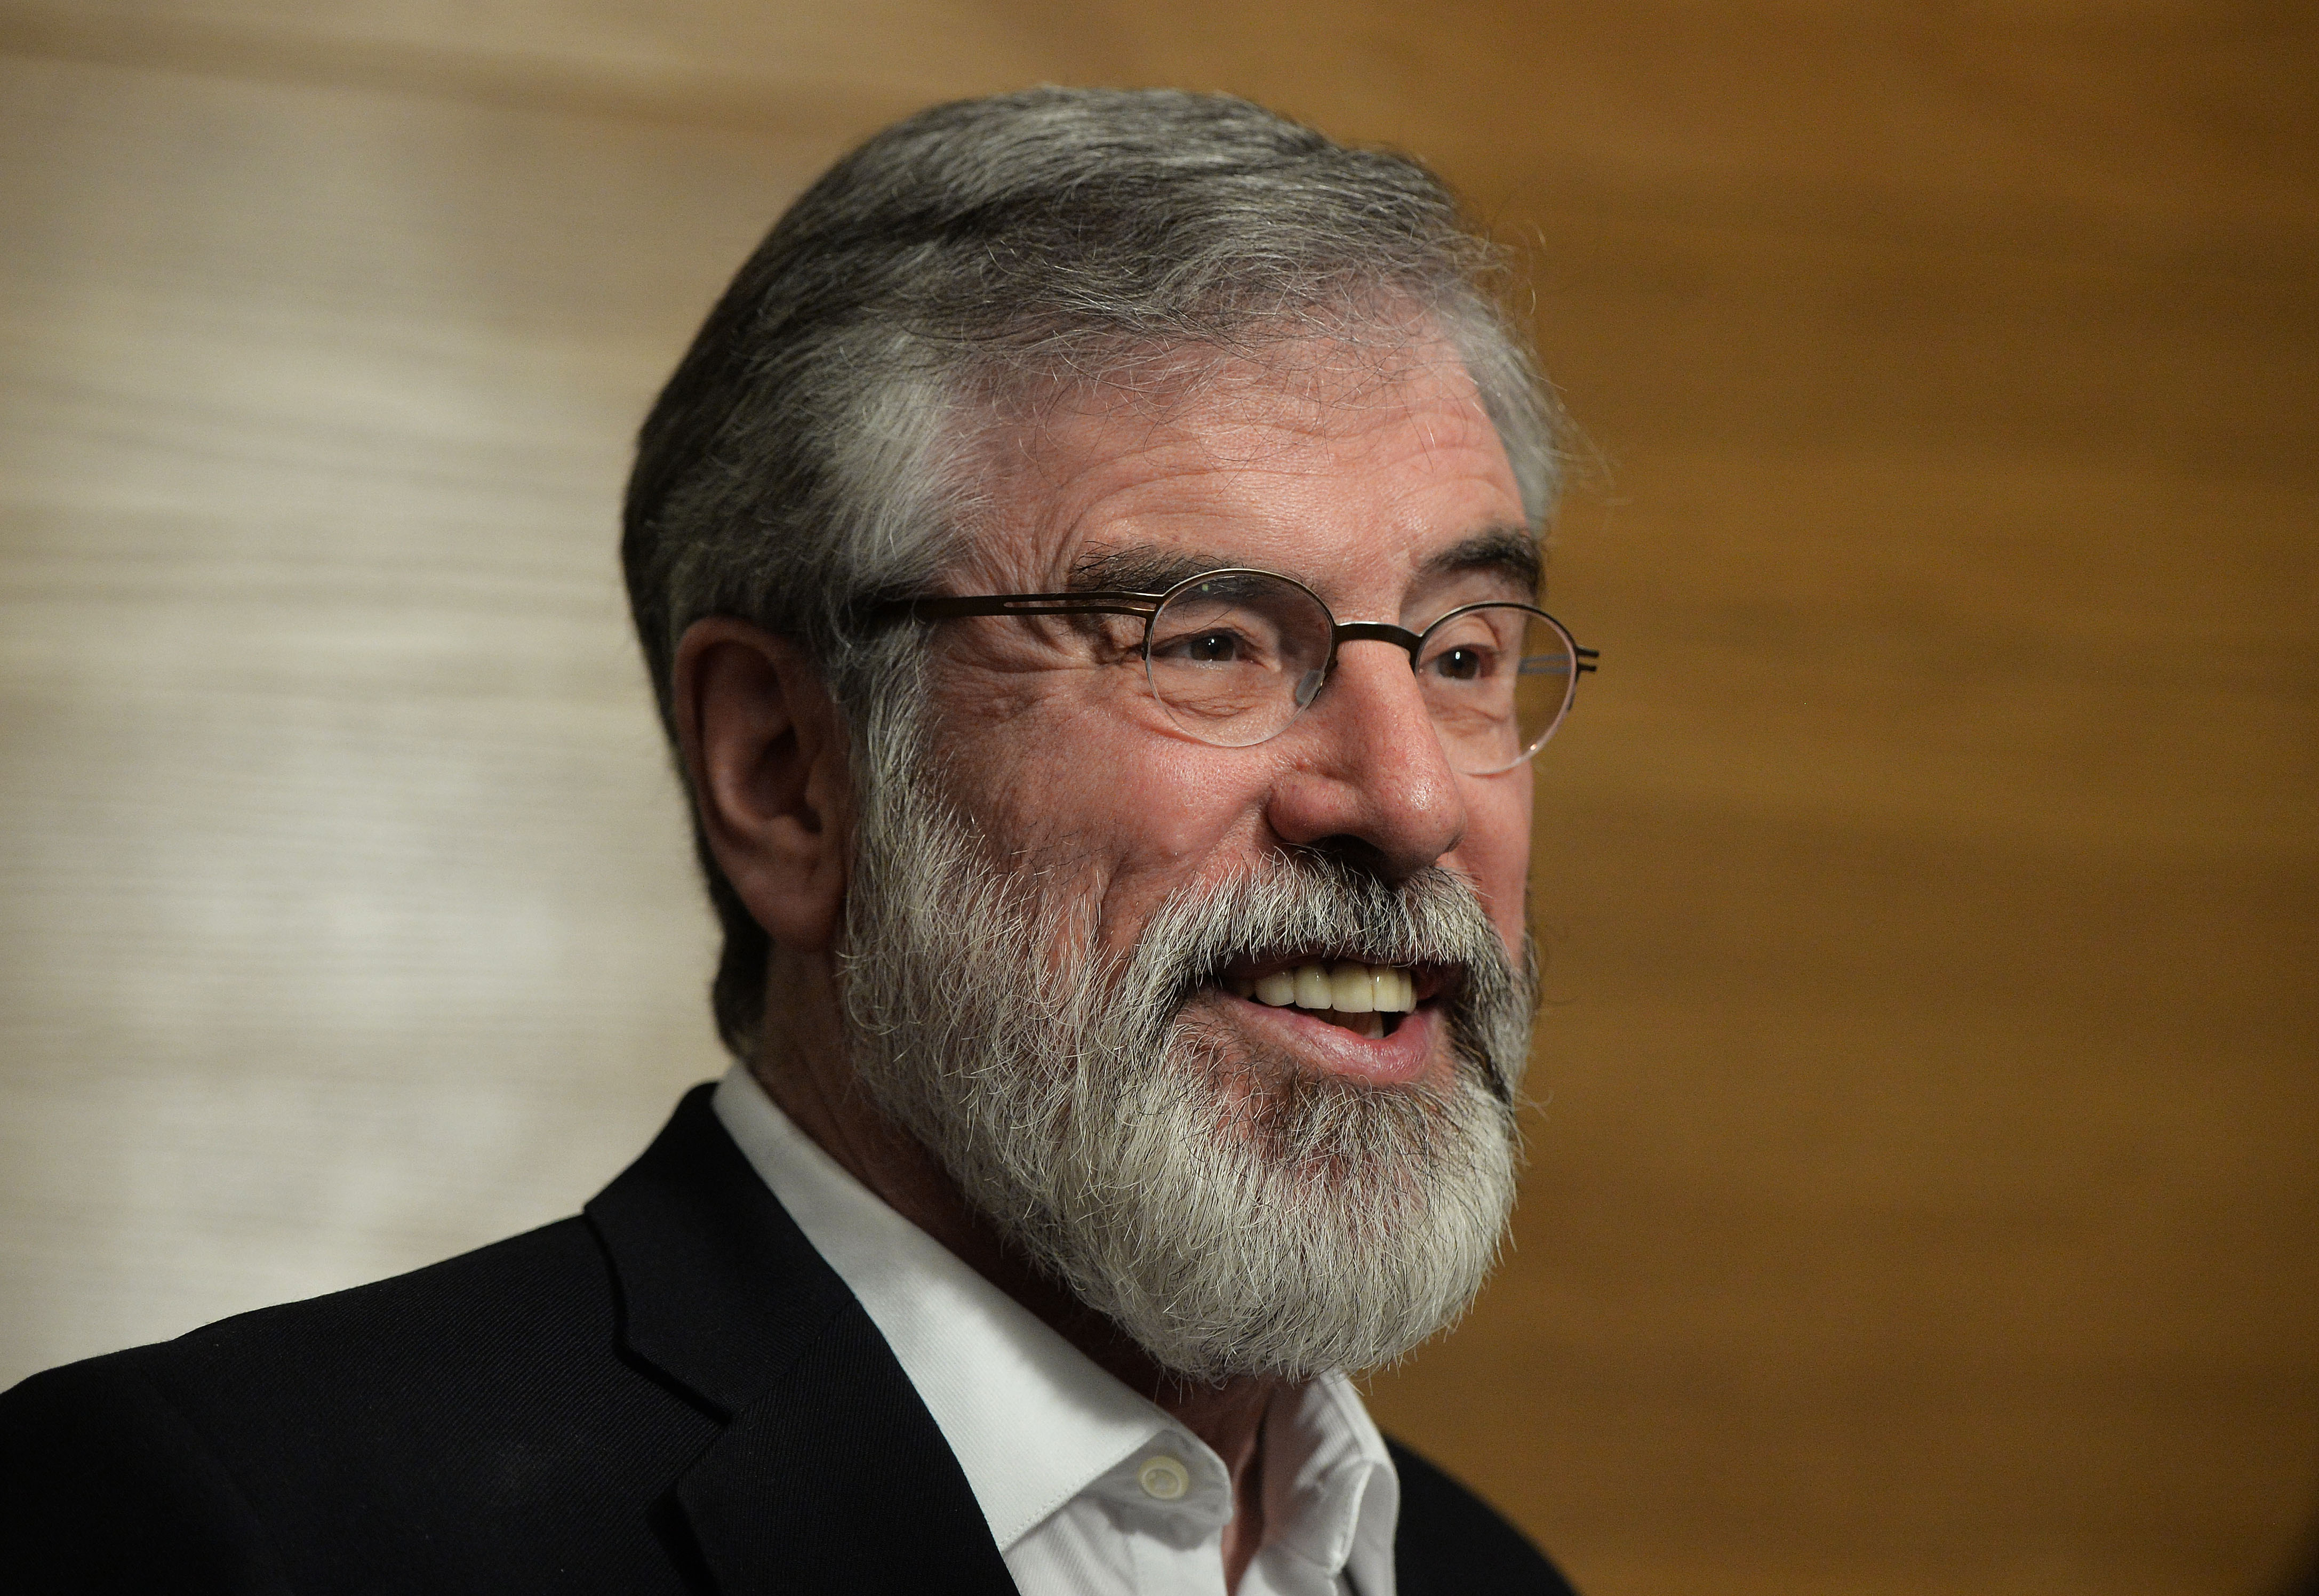 Sinn Fein's Gerry Adams after he was re-elected to government on February 28, 2016 in Dundalk, Ireland. (Charles McQuillan—Getty Images)